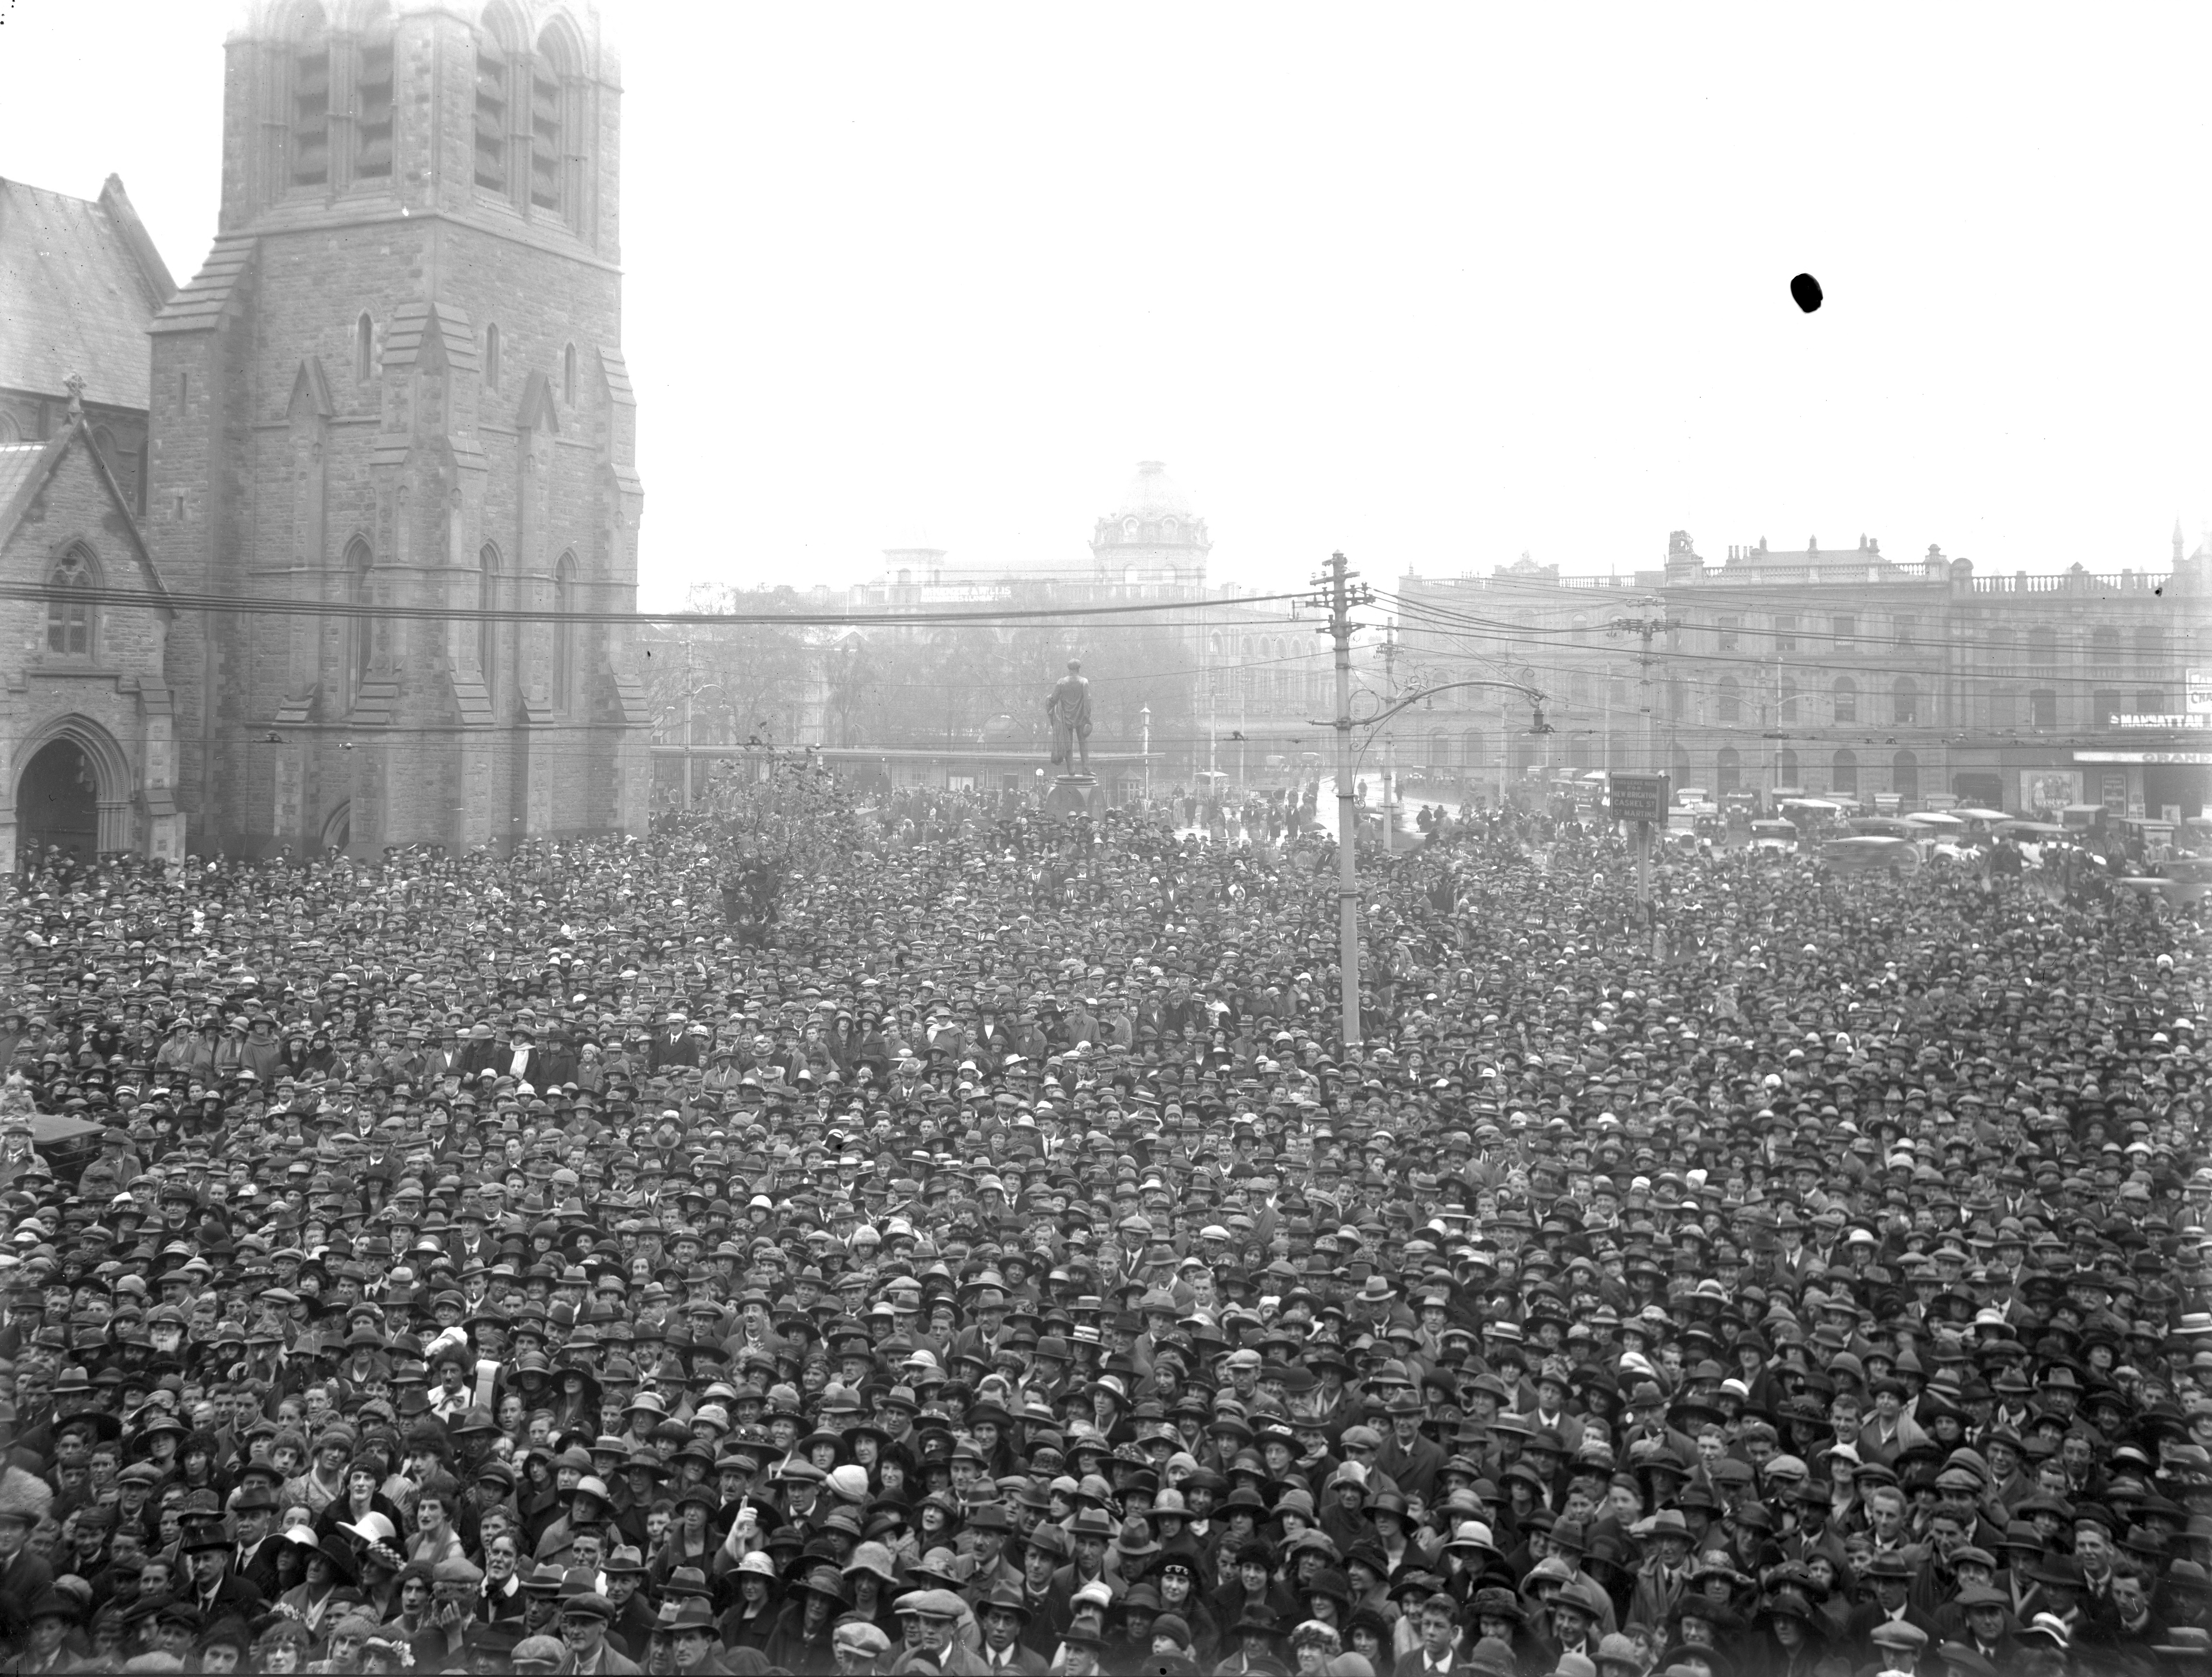 File:Crowd in Cathedral Square, 1920s.jpg - Wikimedia Commons